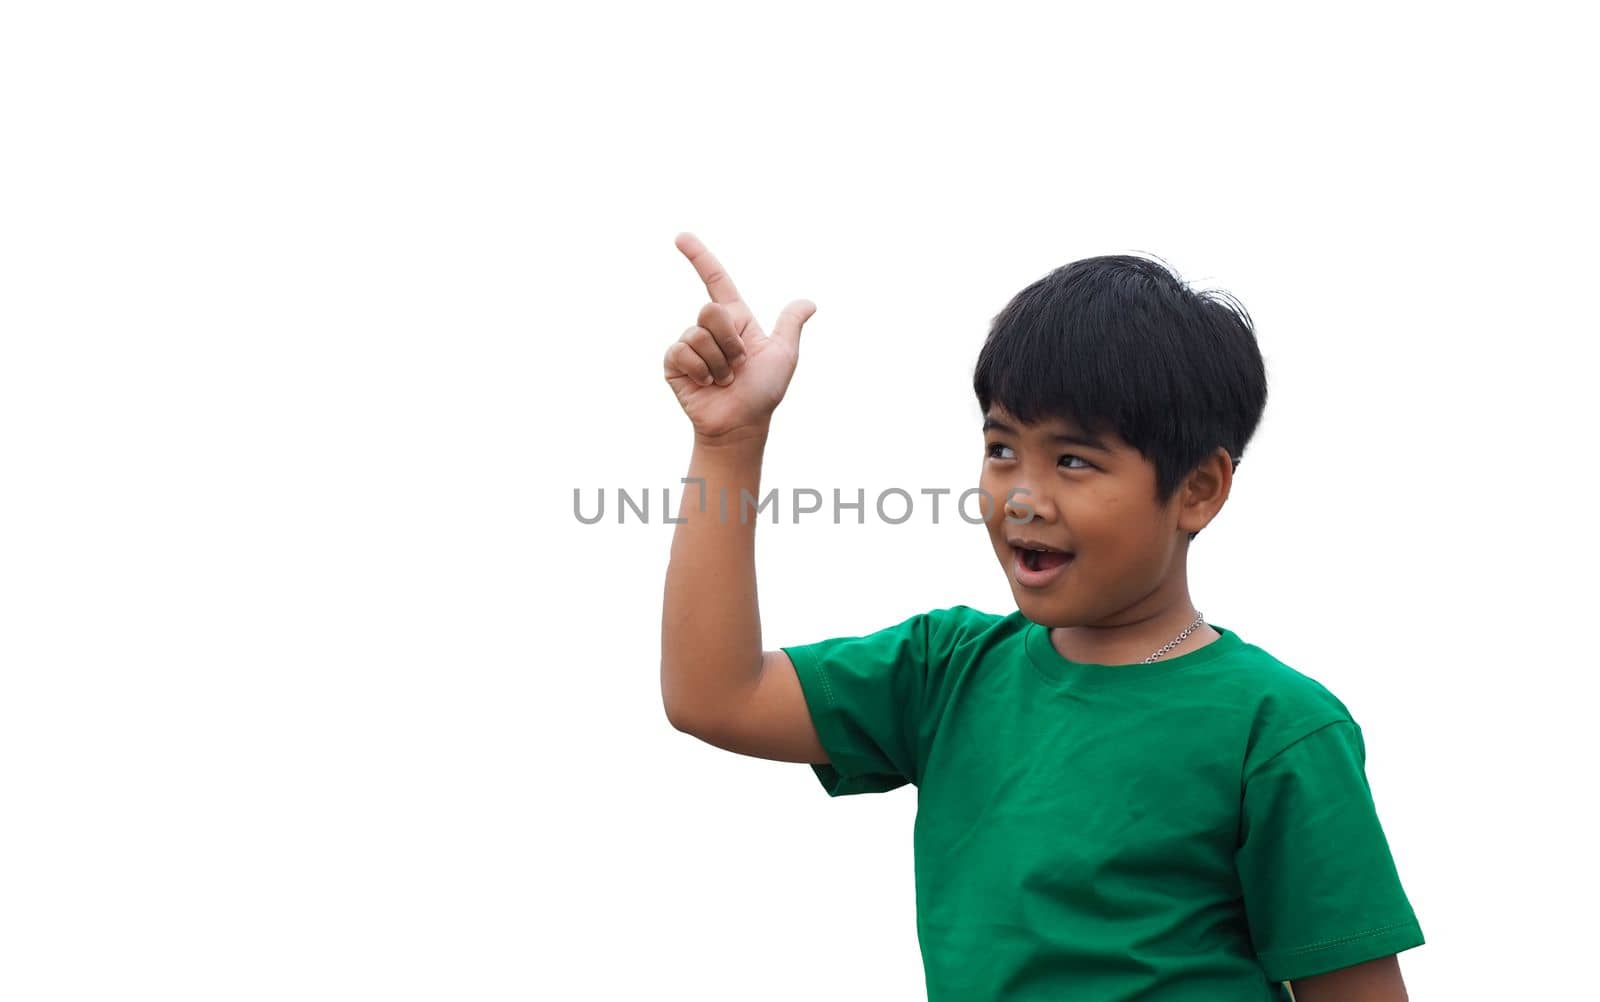 The boy smiled and pointed his hand to his side. on a white background